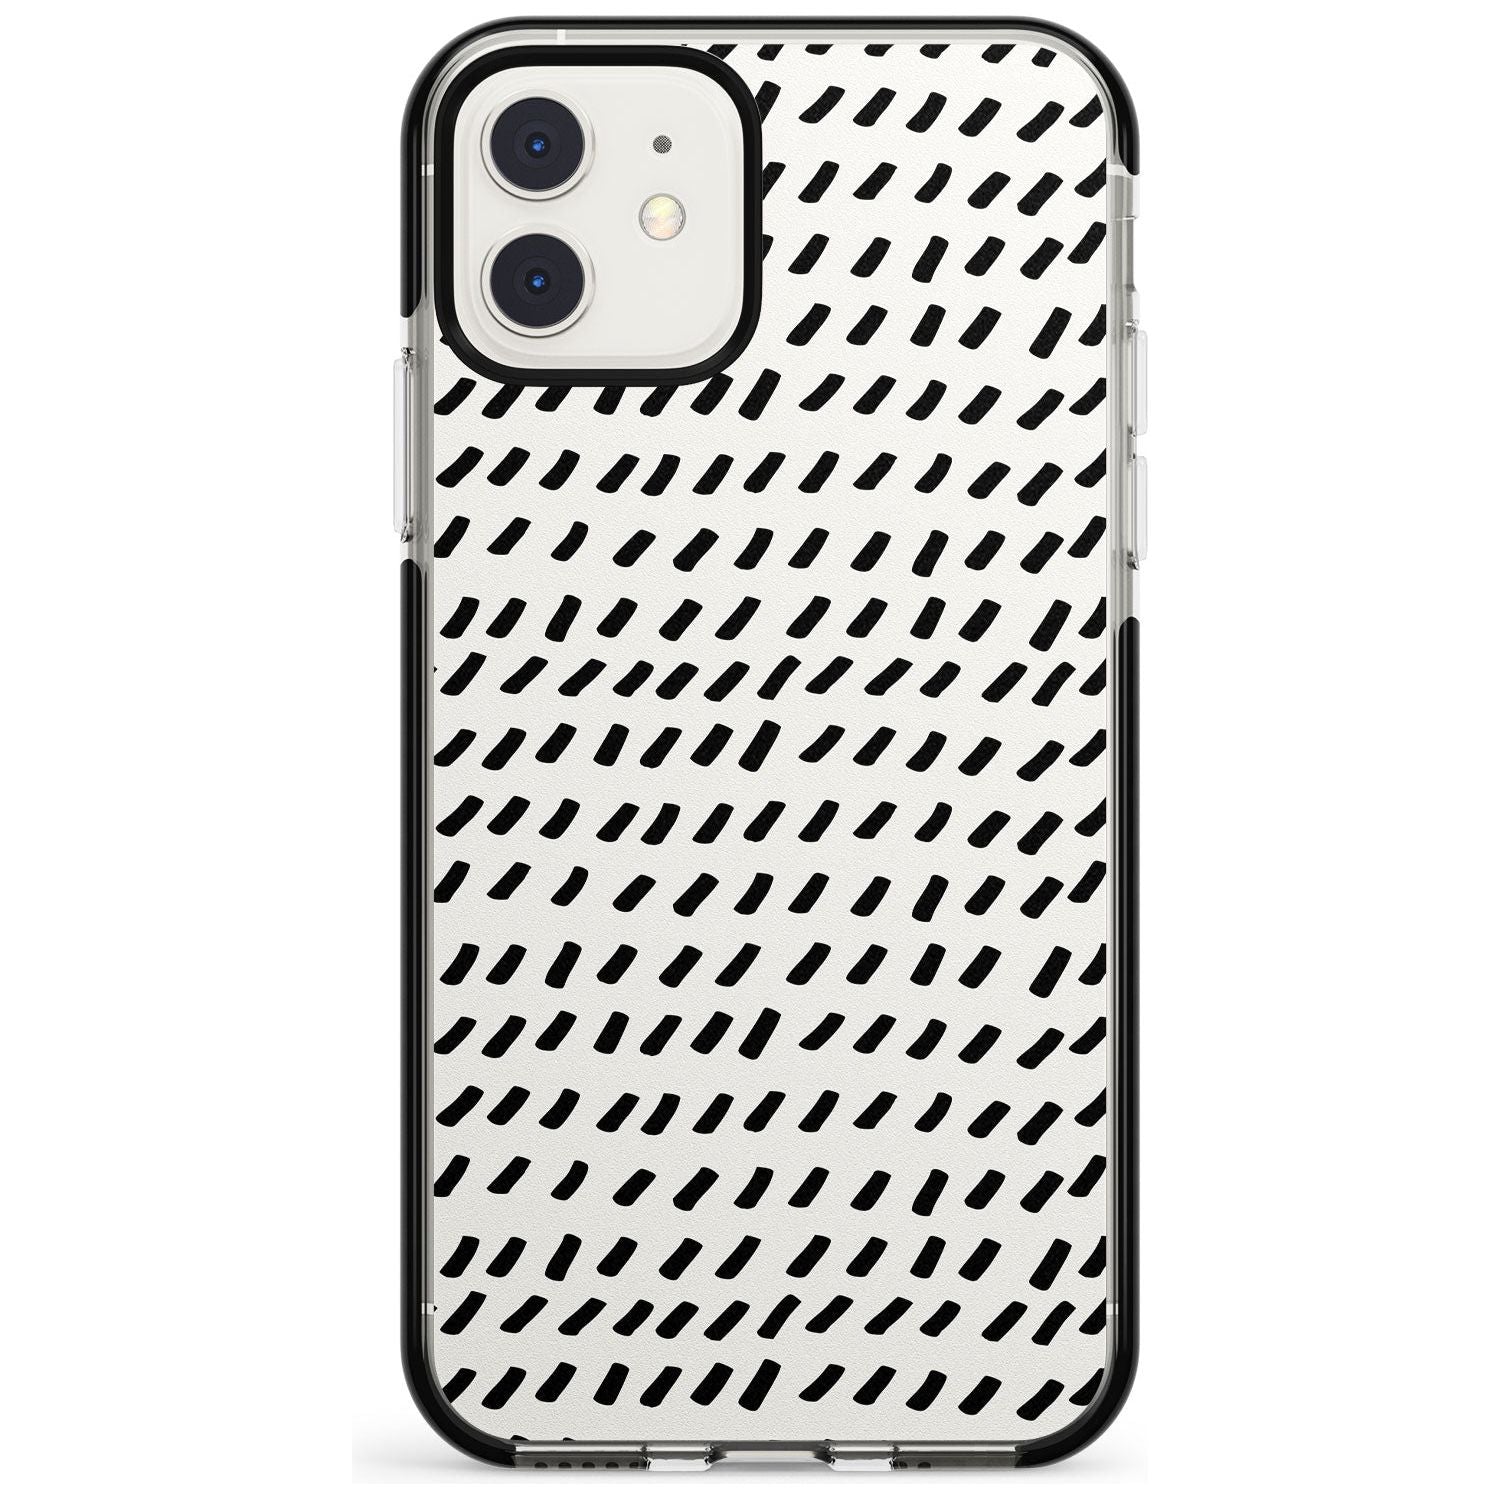 Hand Drawn Lines Pattern Black Impact Phone Case for iPhone 11